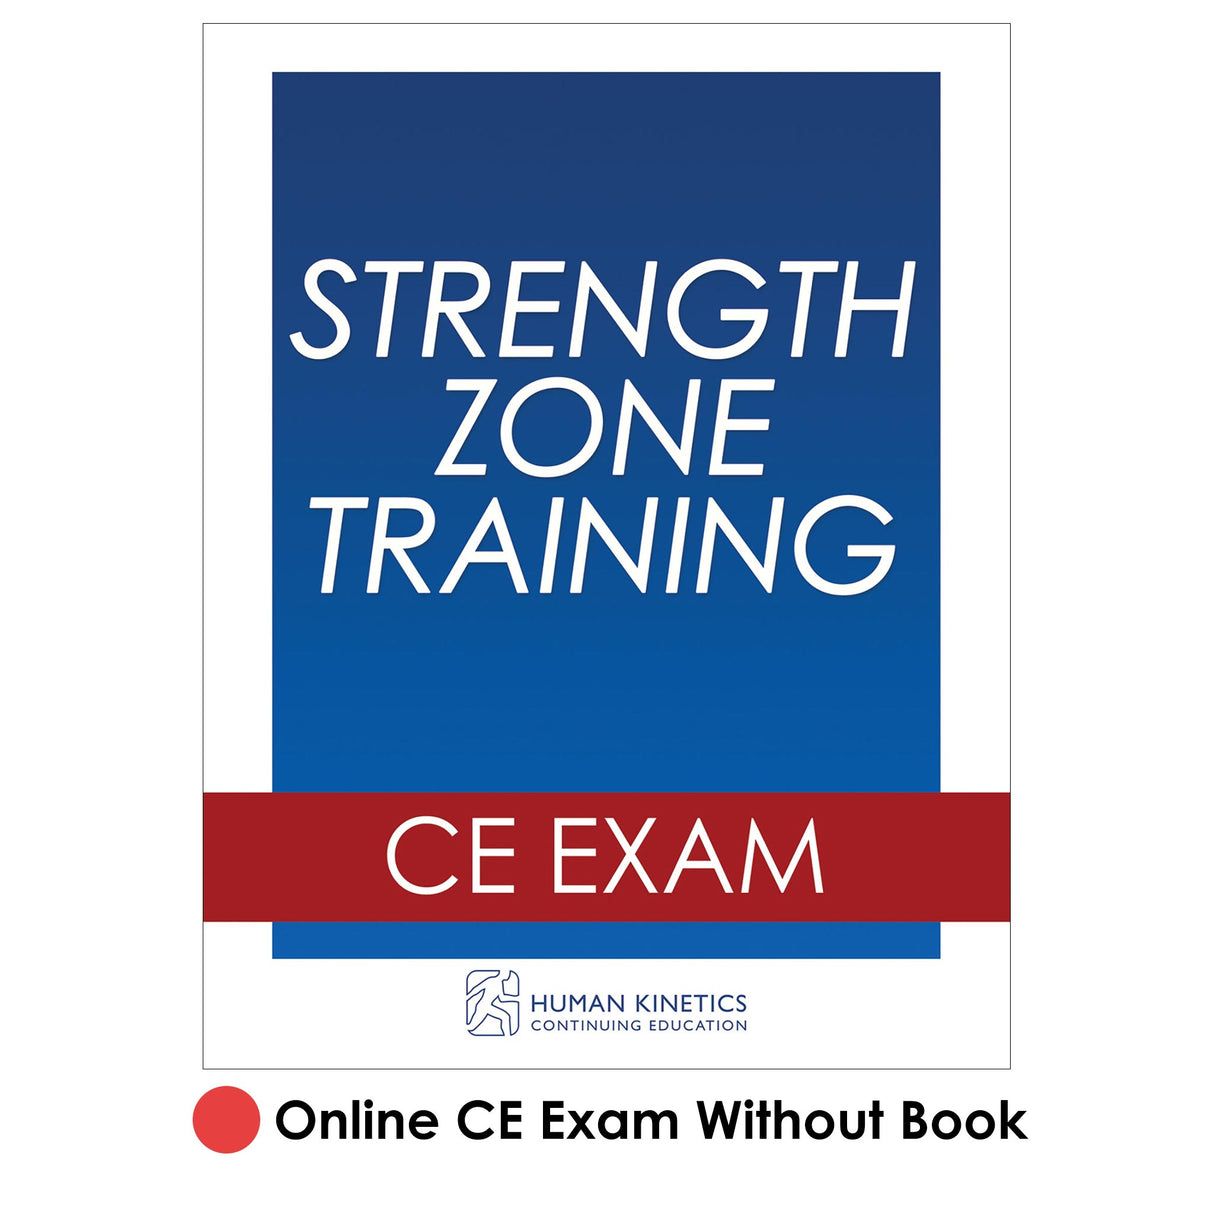 Strength Zone Training Online CE Exam Without Book